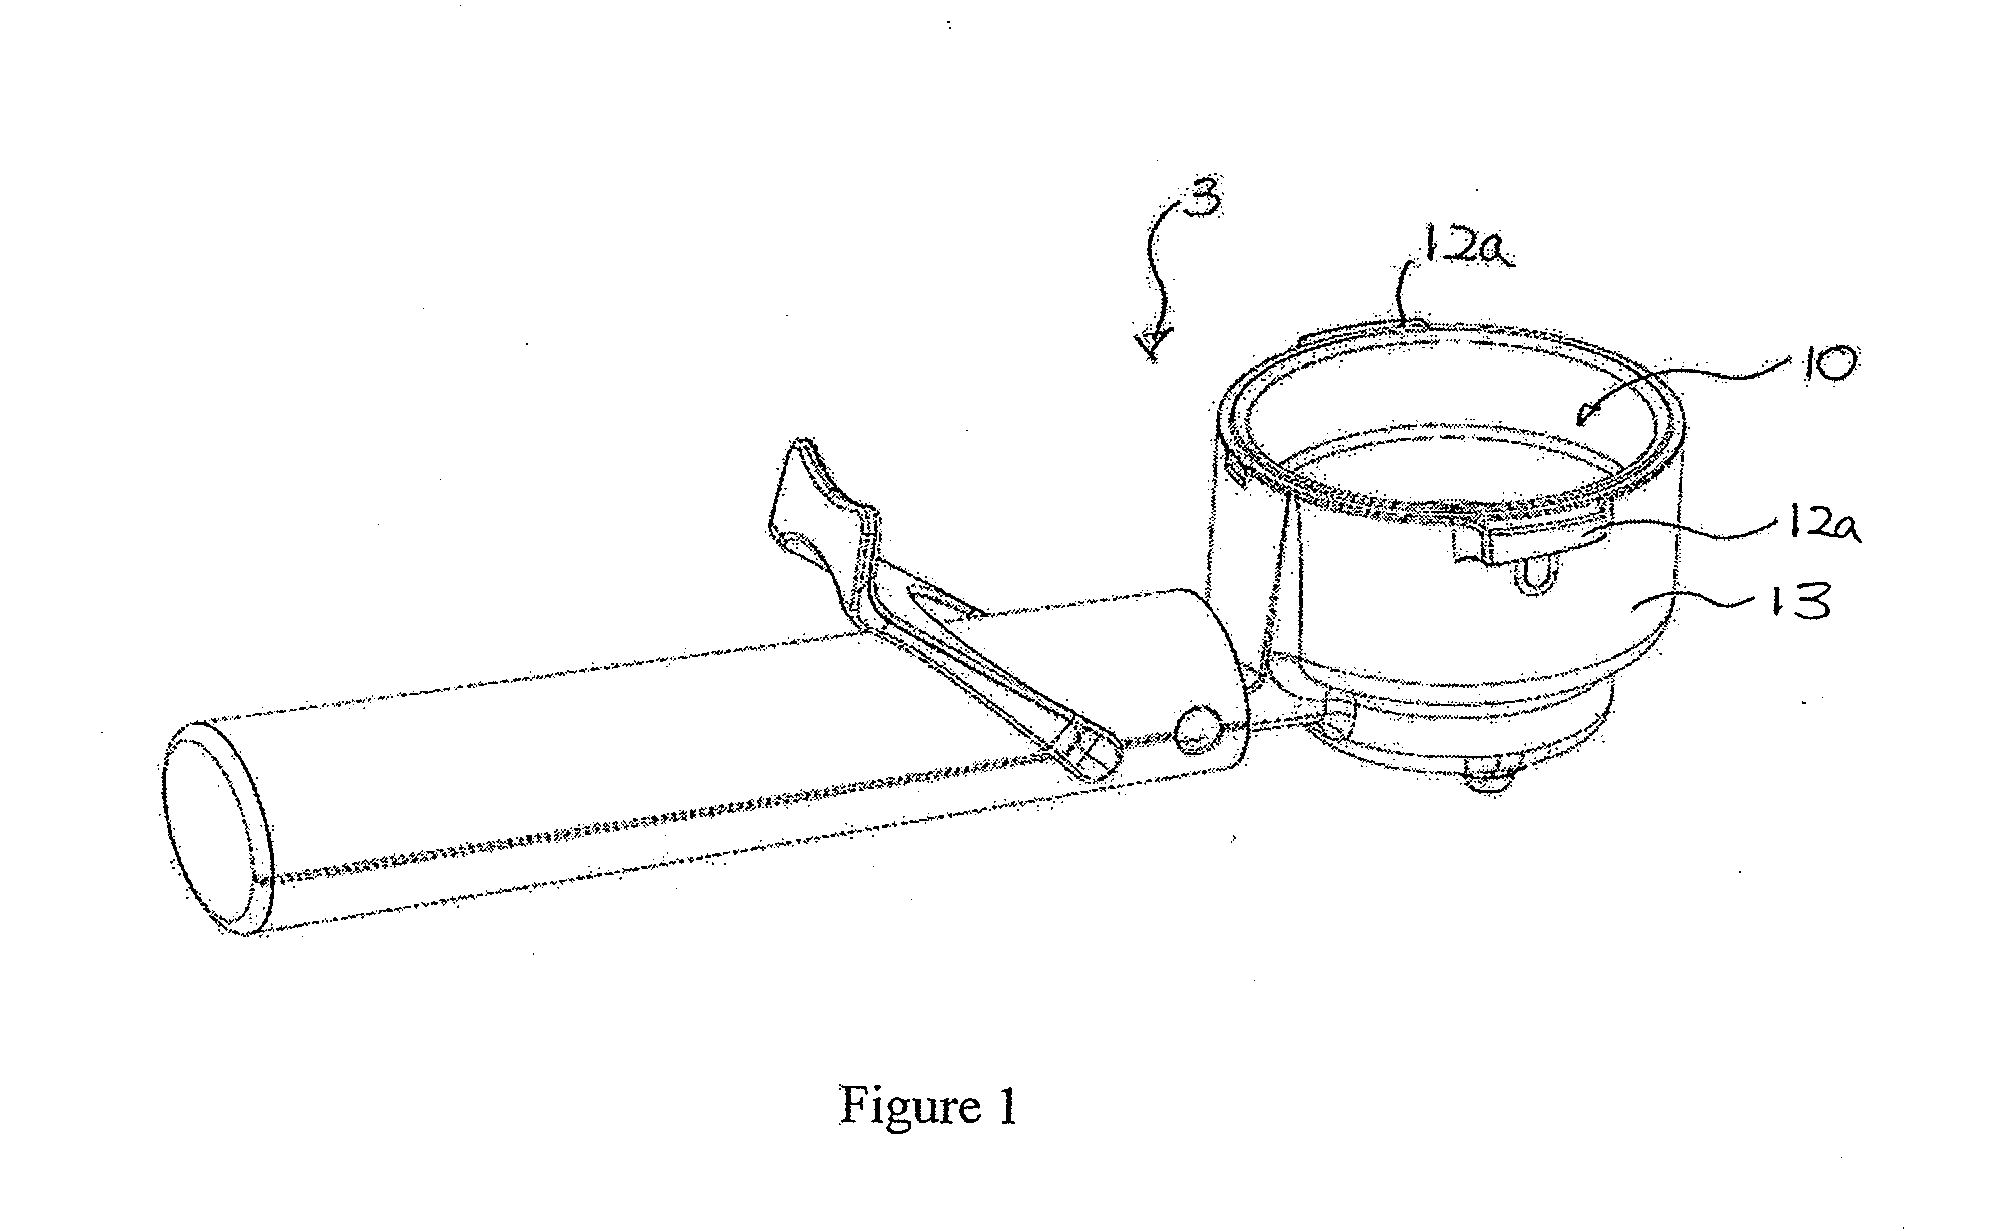 Tamping device